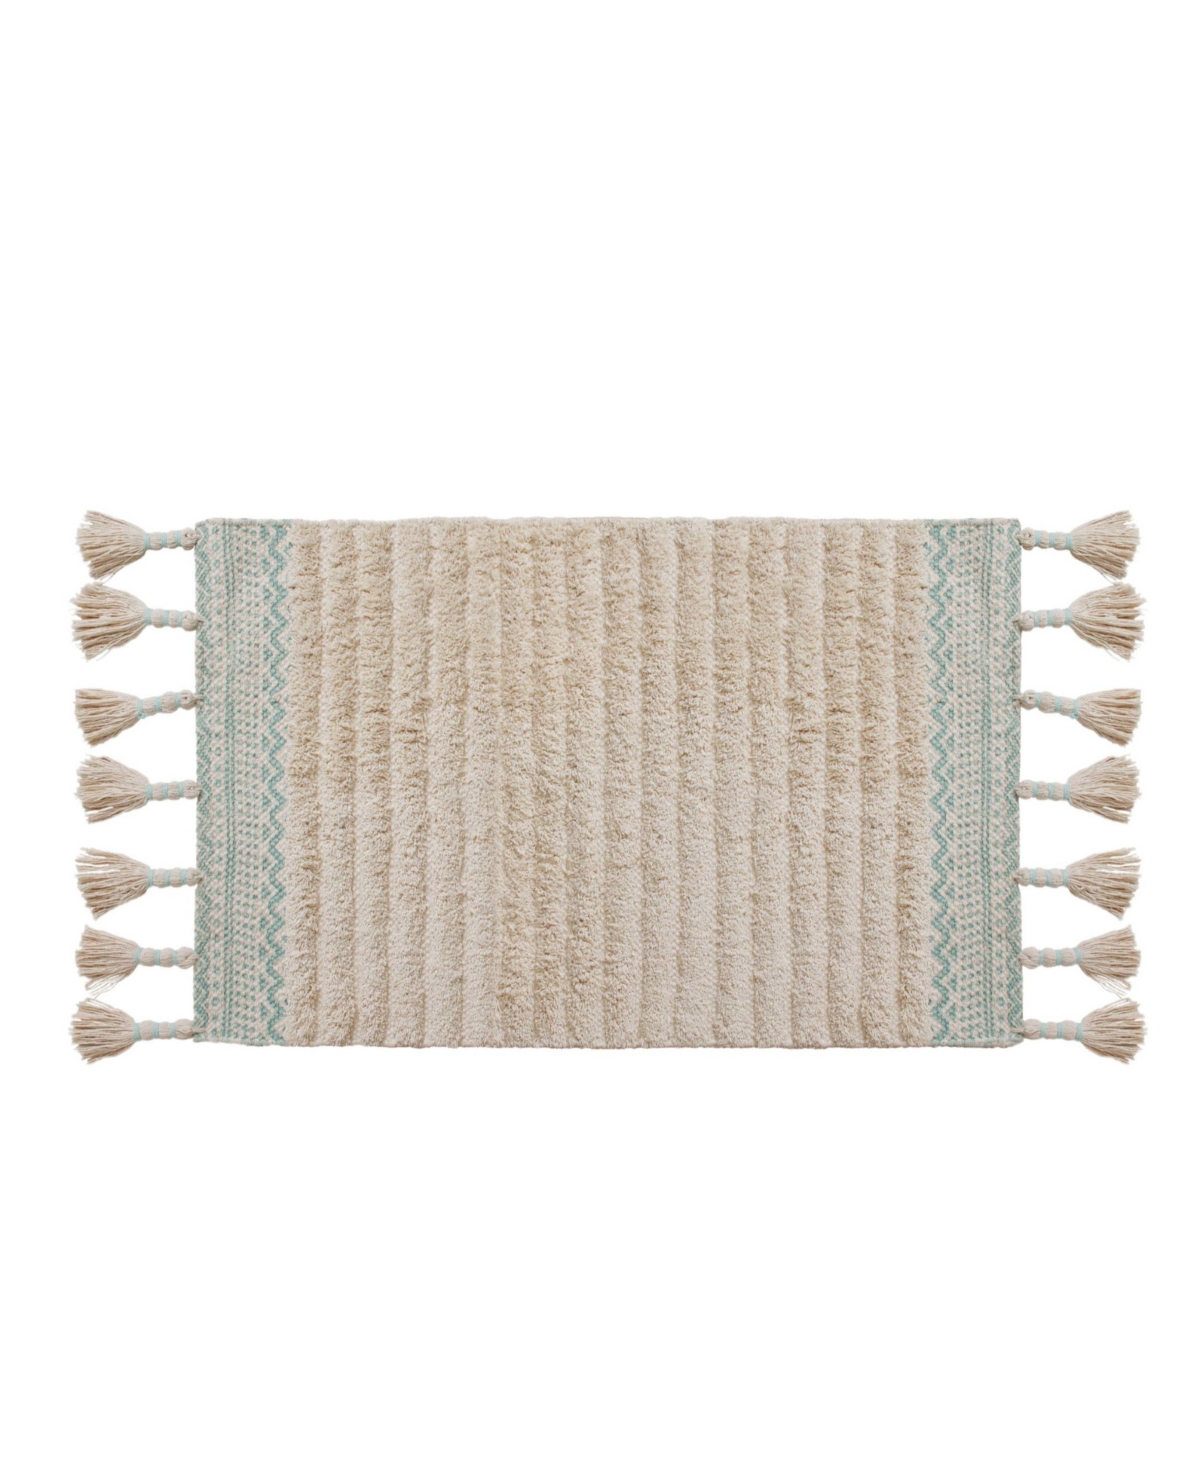 Lucky Brand Demian Overtufted Cotton Fringe Bath Rug, 20" X 40" Bedding In Aqua